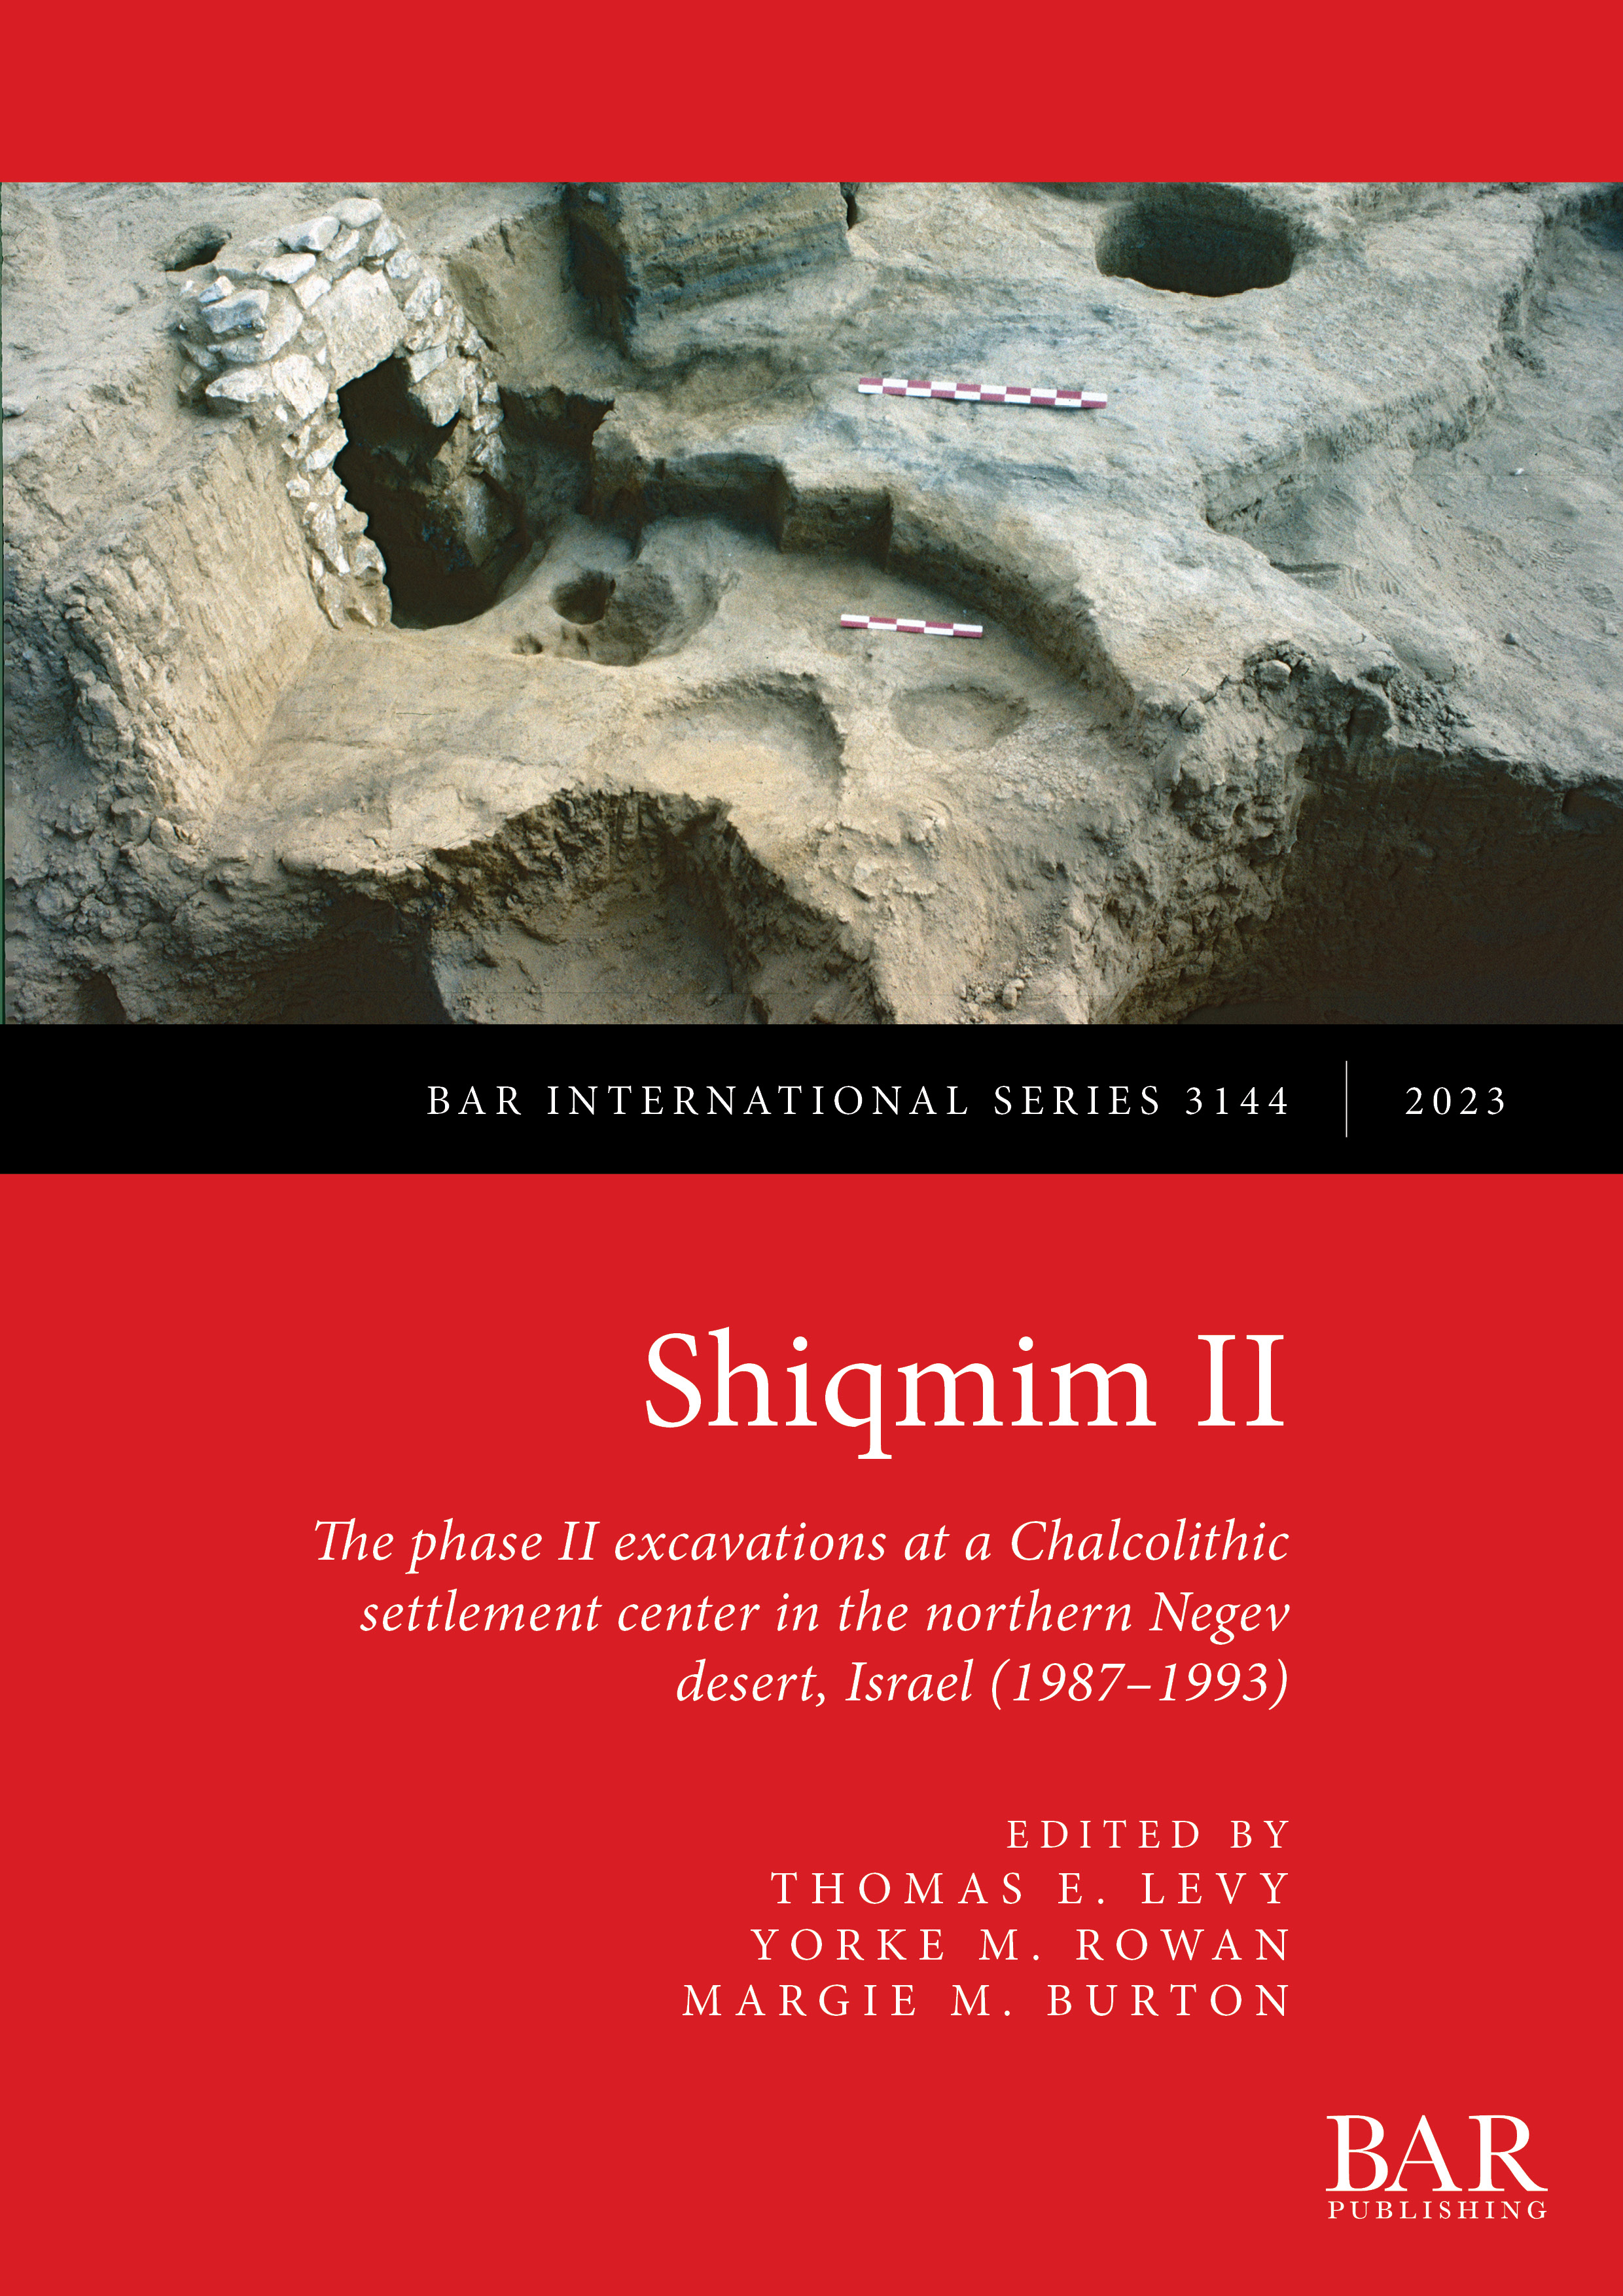 Shiqmim II: The phase II excavations at a Chalcolithic settlement center in the northern Negev desert, Israel (1987 - 1993)